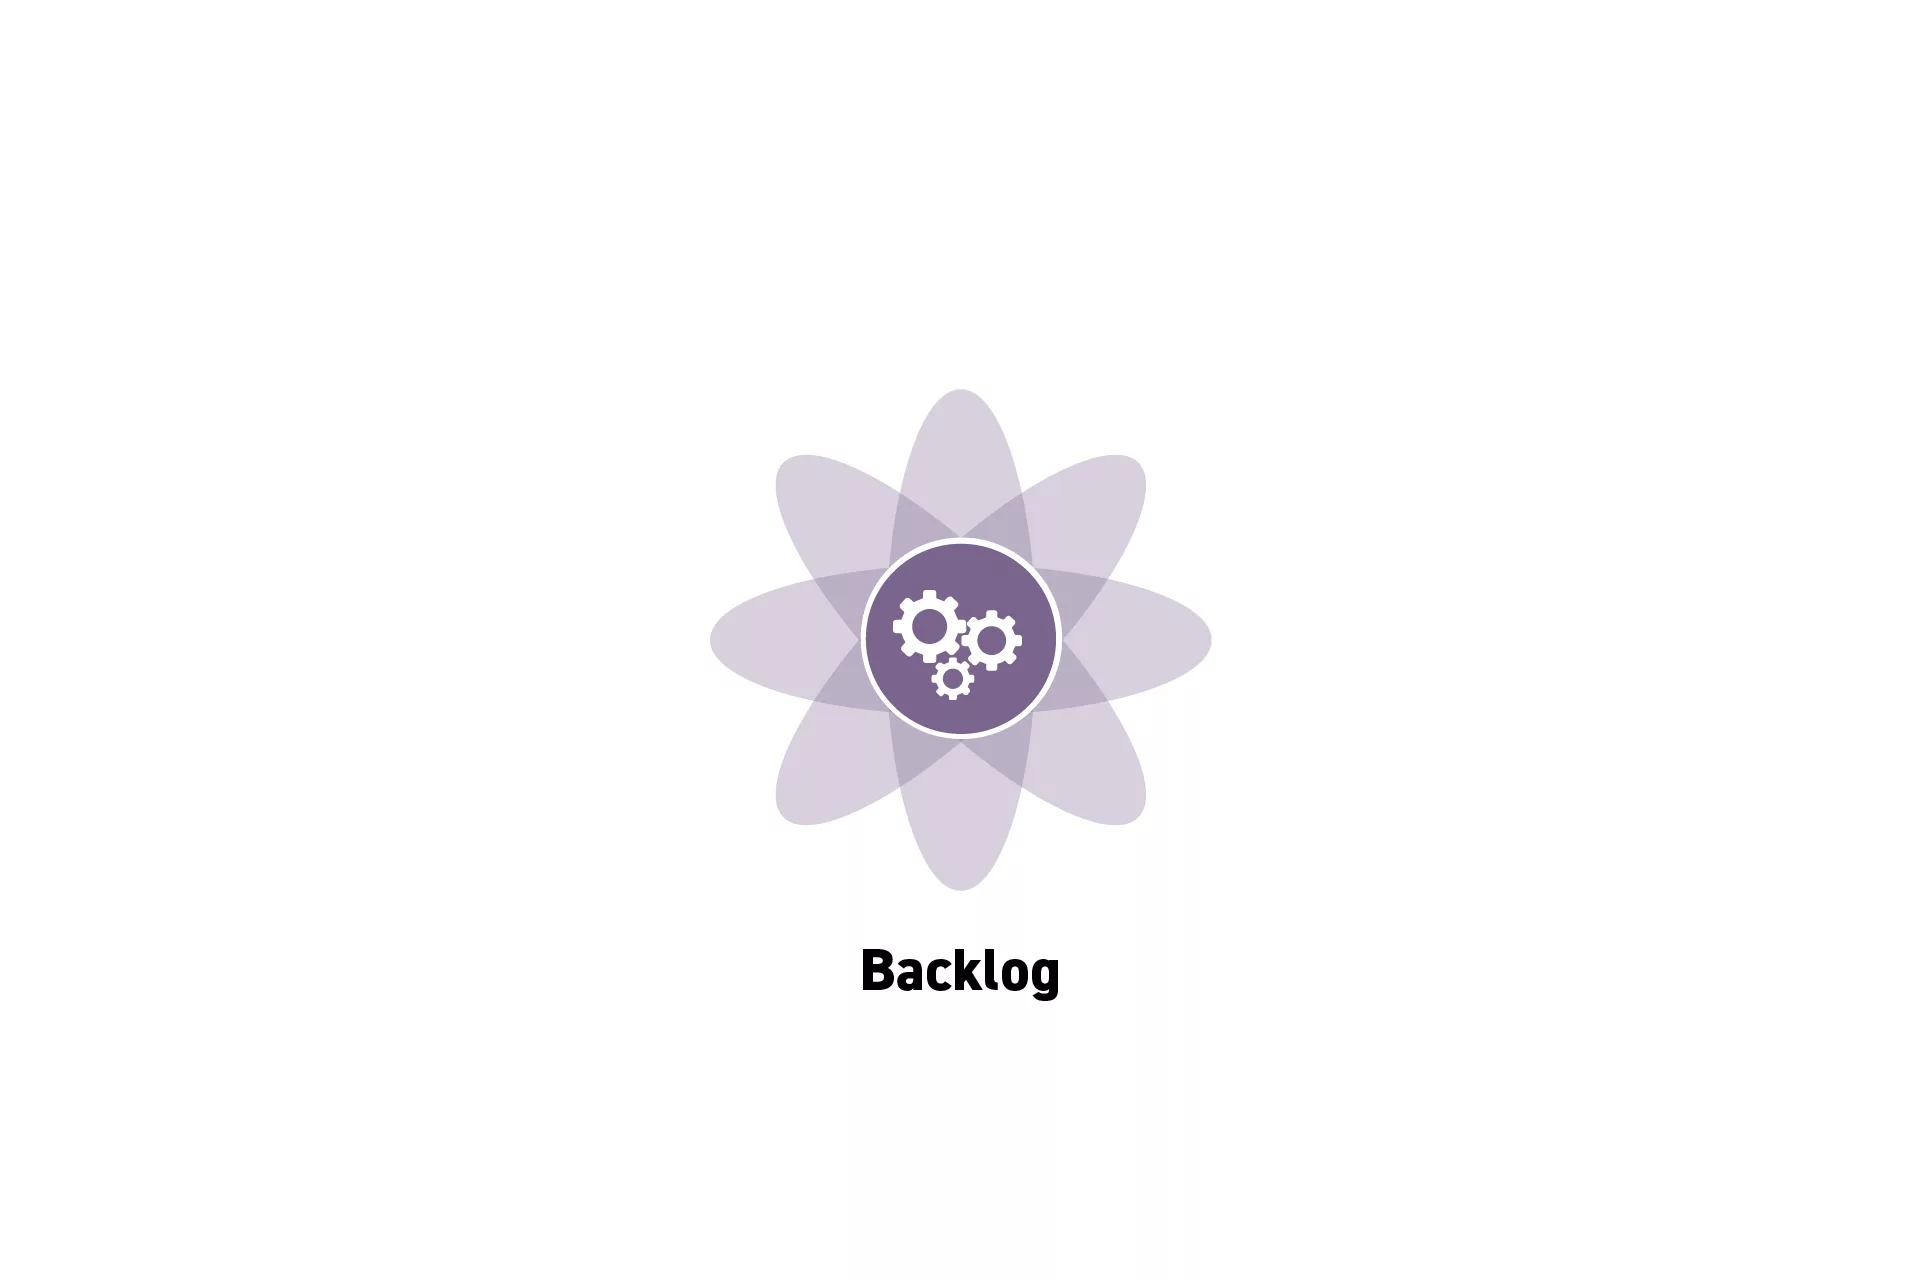 <p>A flower that represents Project Management with the text “Backlog” beneath it.</p>